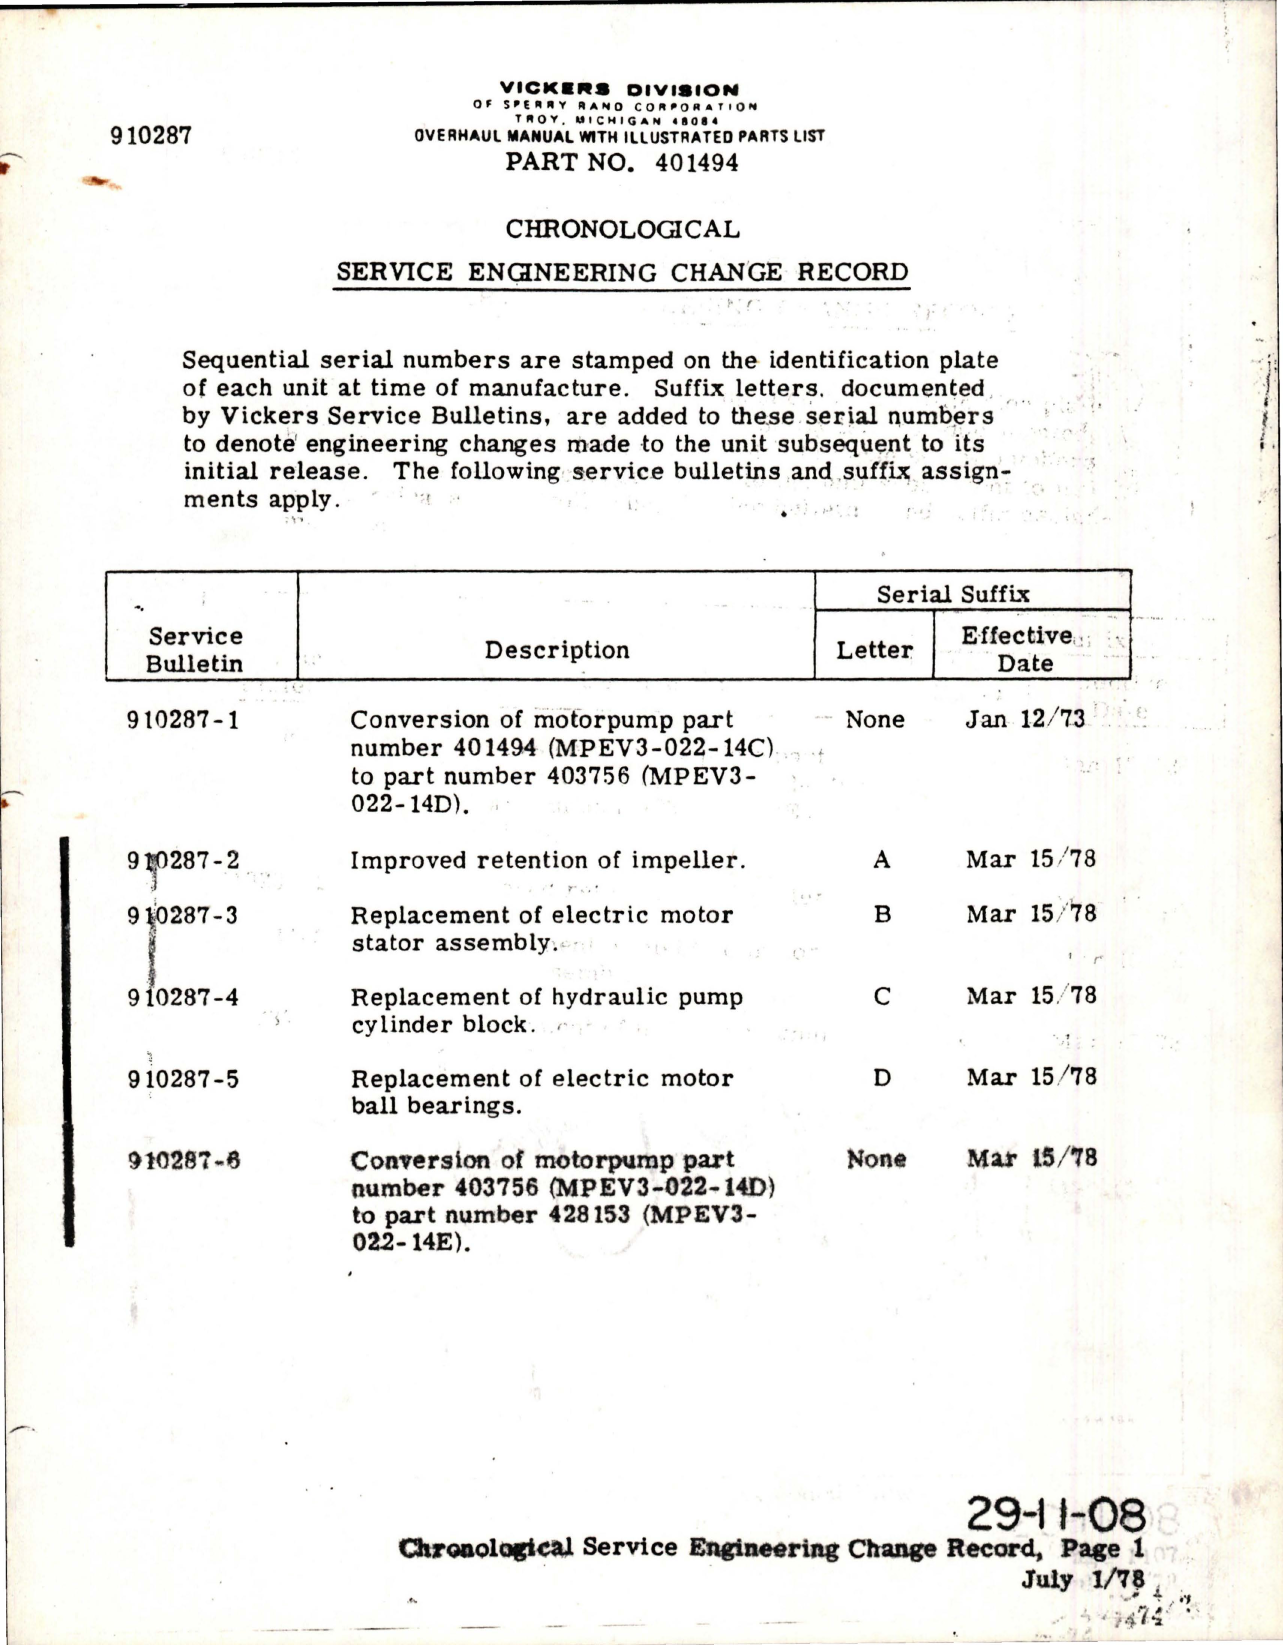 Sample page 1 from AirCorps Library document: Chronological Service Engineering Change Record - Part 401494